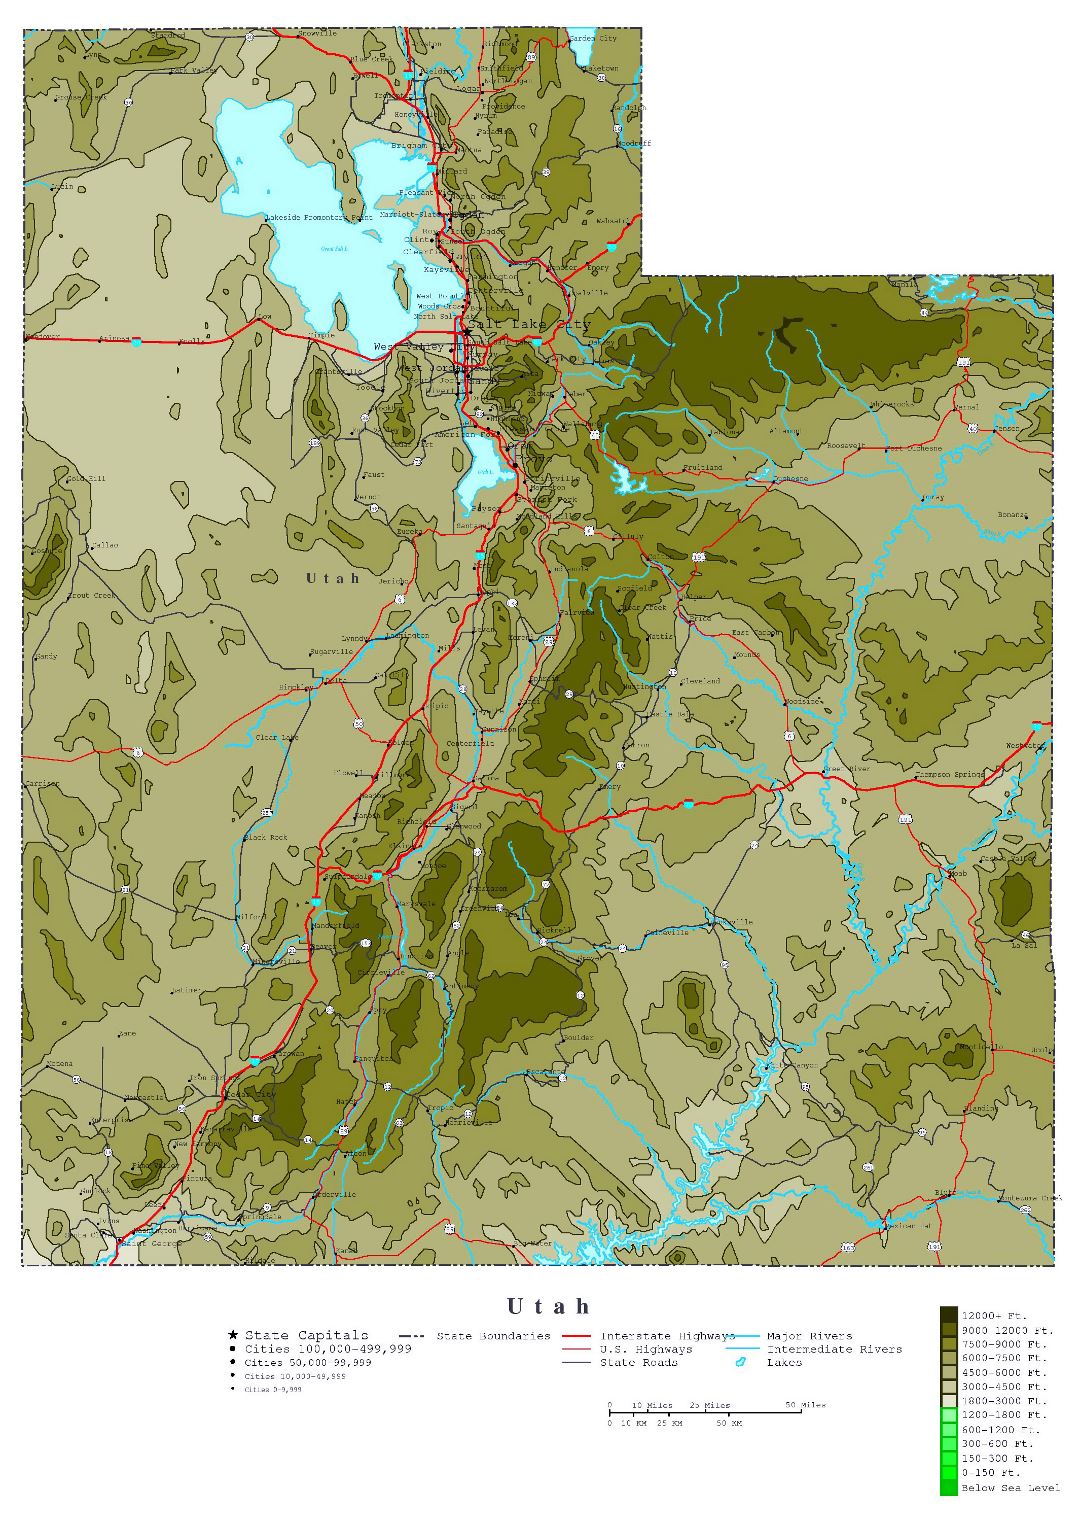 Large detailed elevation map of Utah state with roads, highways and cities